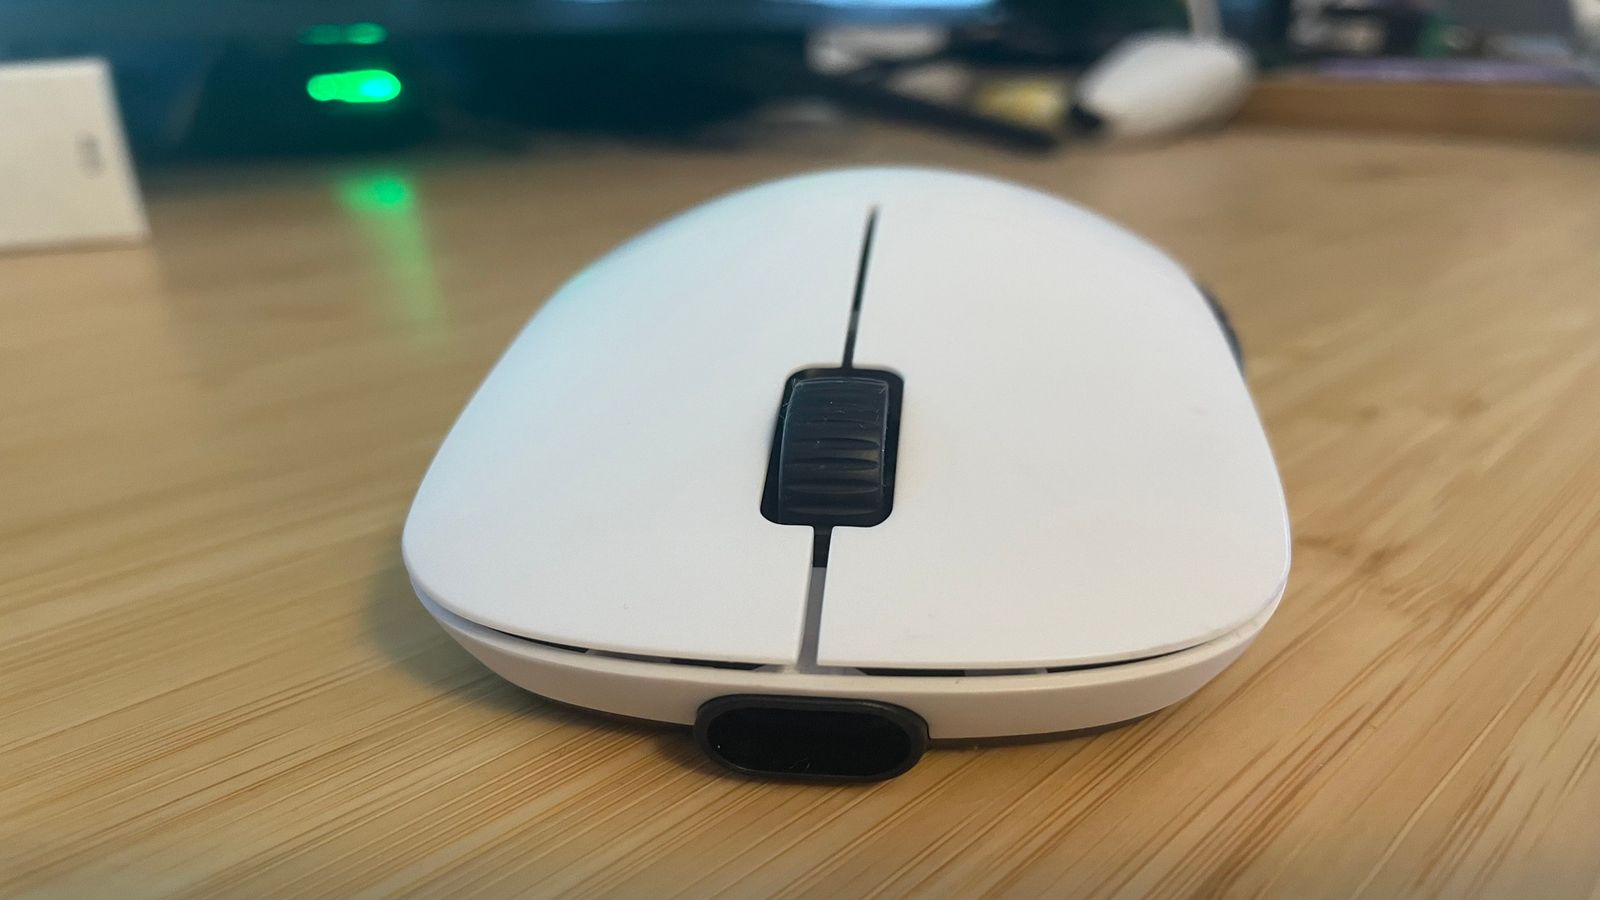 The front of the Endgame Gear XM2WE Wireless Mouse